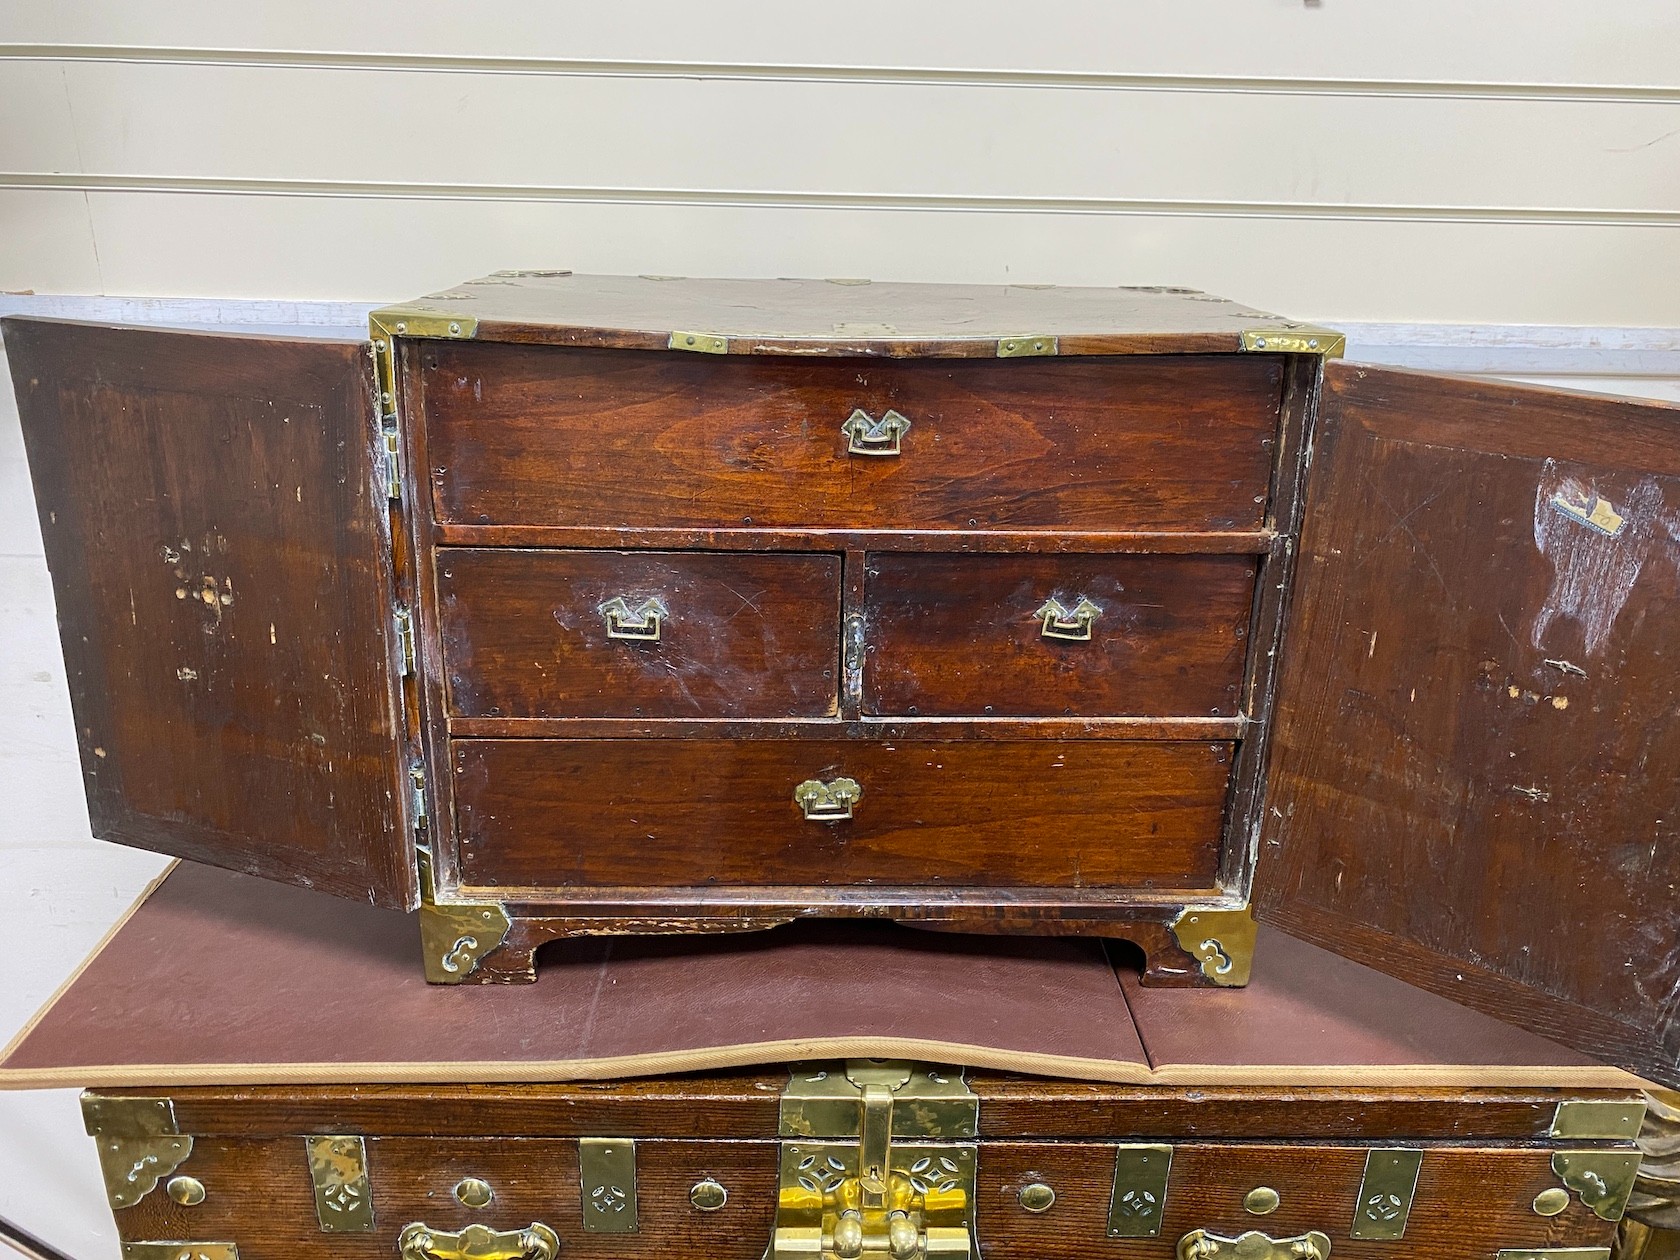 A 19th century Korean brass mounted zelkova bandaji chest and a similar 'safe' cabinet, The larger cabinet height 92cm, width 104cm, depth 52cm deep, the smaller cabinet height 45.5cm, width 59cm, depth 35cm